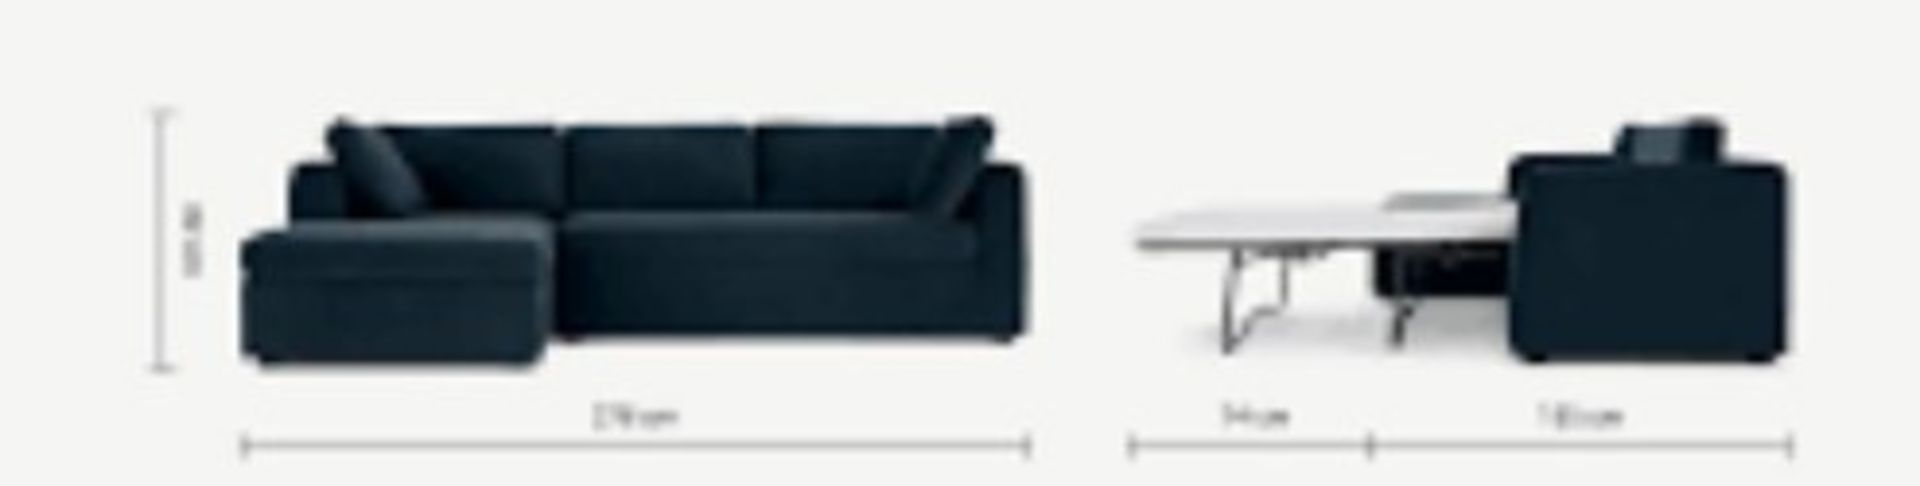 New & Boxed Made.com Mogen Left Hand Facing Chaise End Sofa Bed - Steel Boucle. RRP £2,899. Thick, - Image 4 of 5